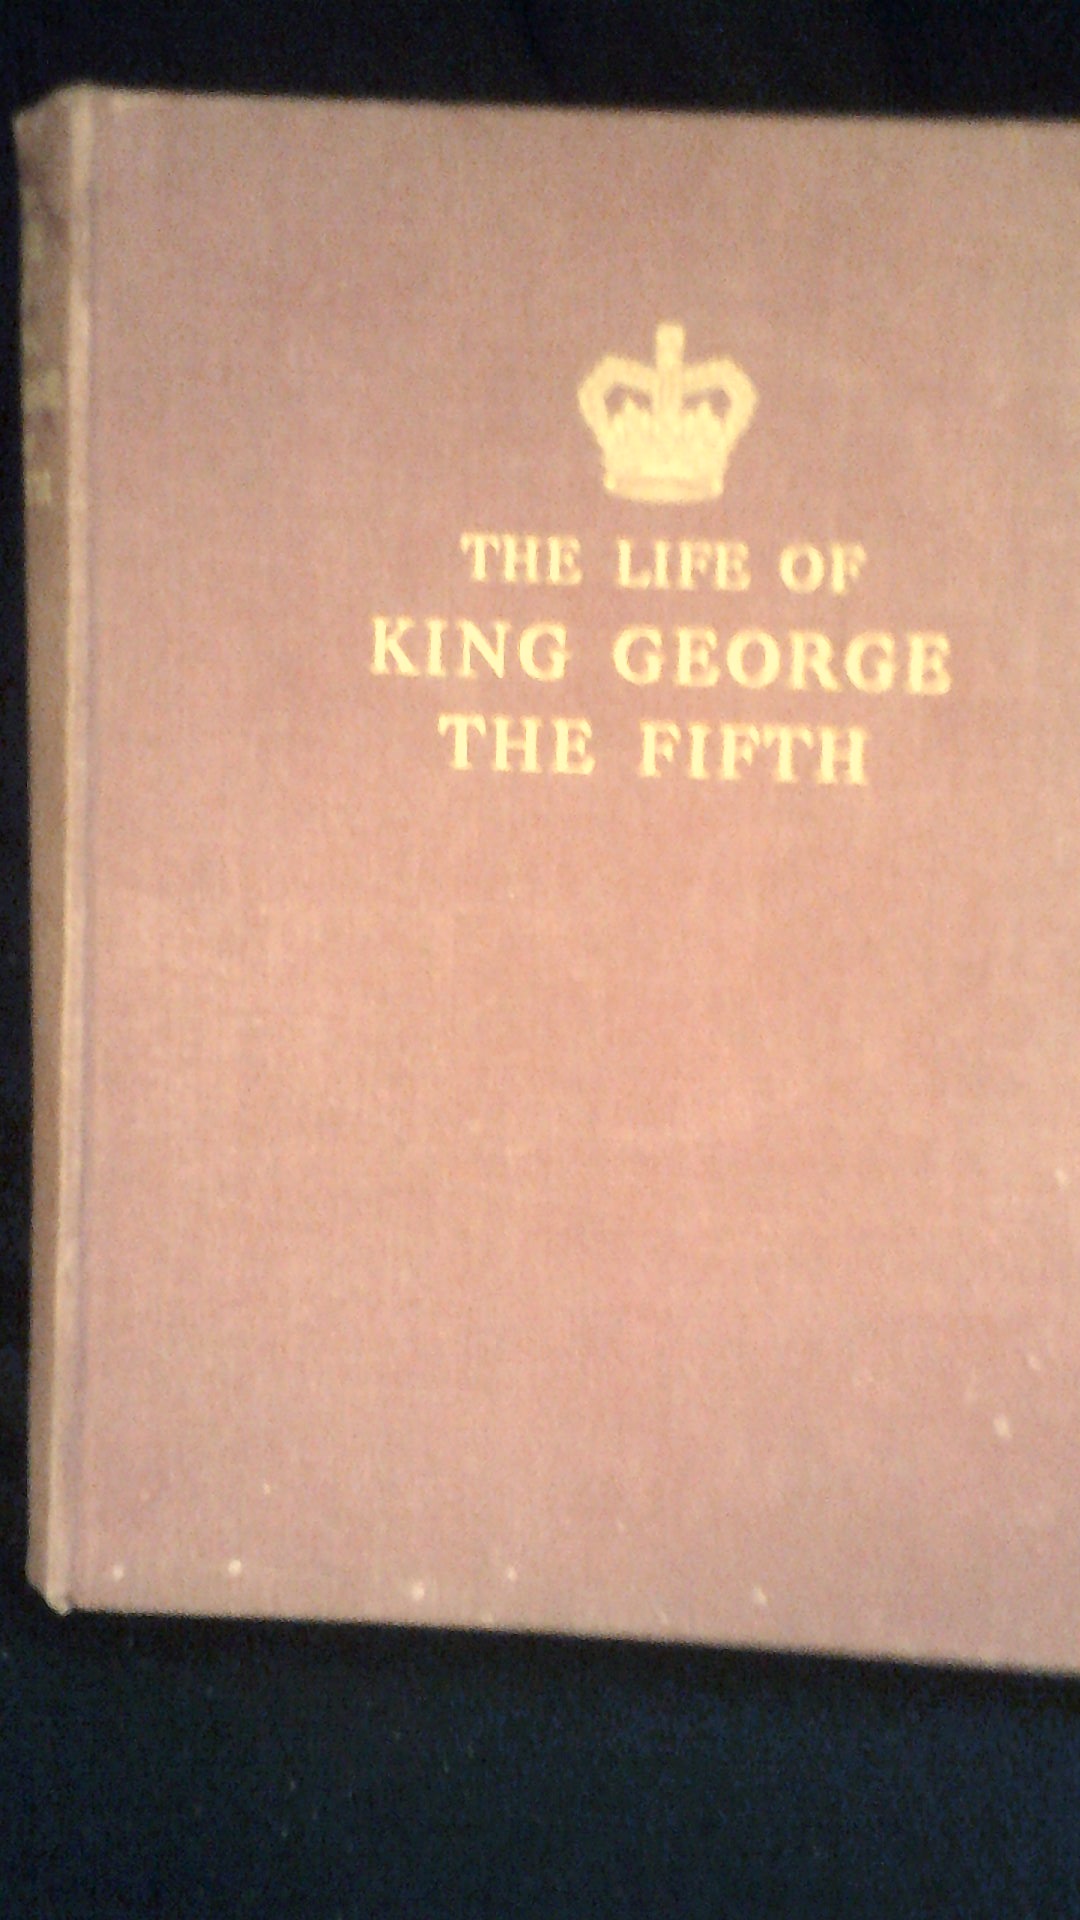 Book-The Life of King George the Fifth, Published by George Newnes Ltd, London, some foxing on the